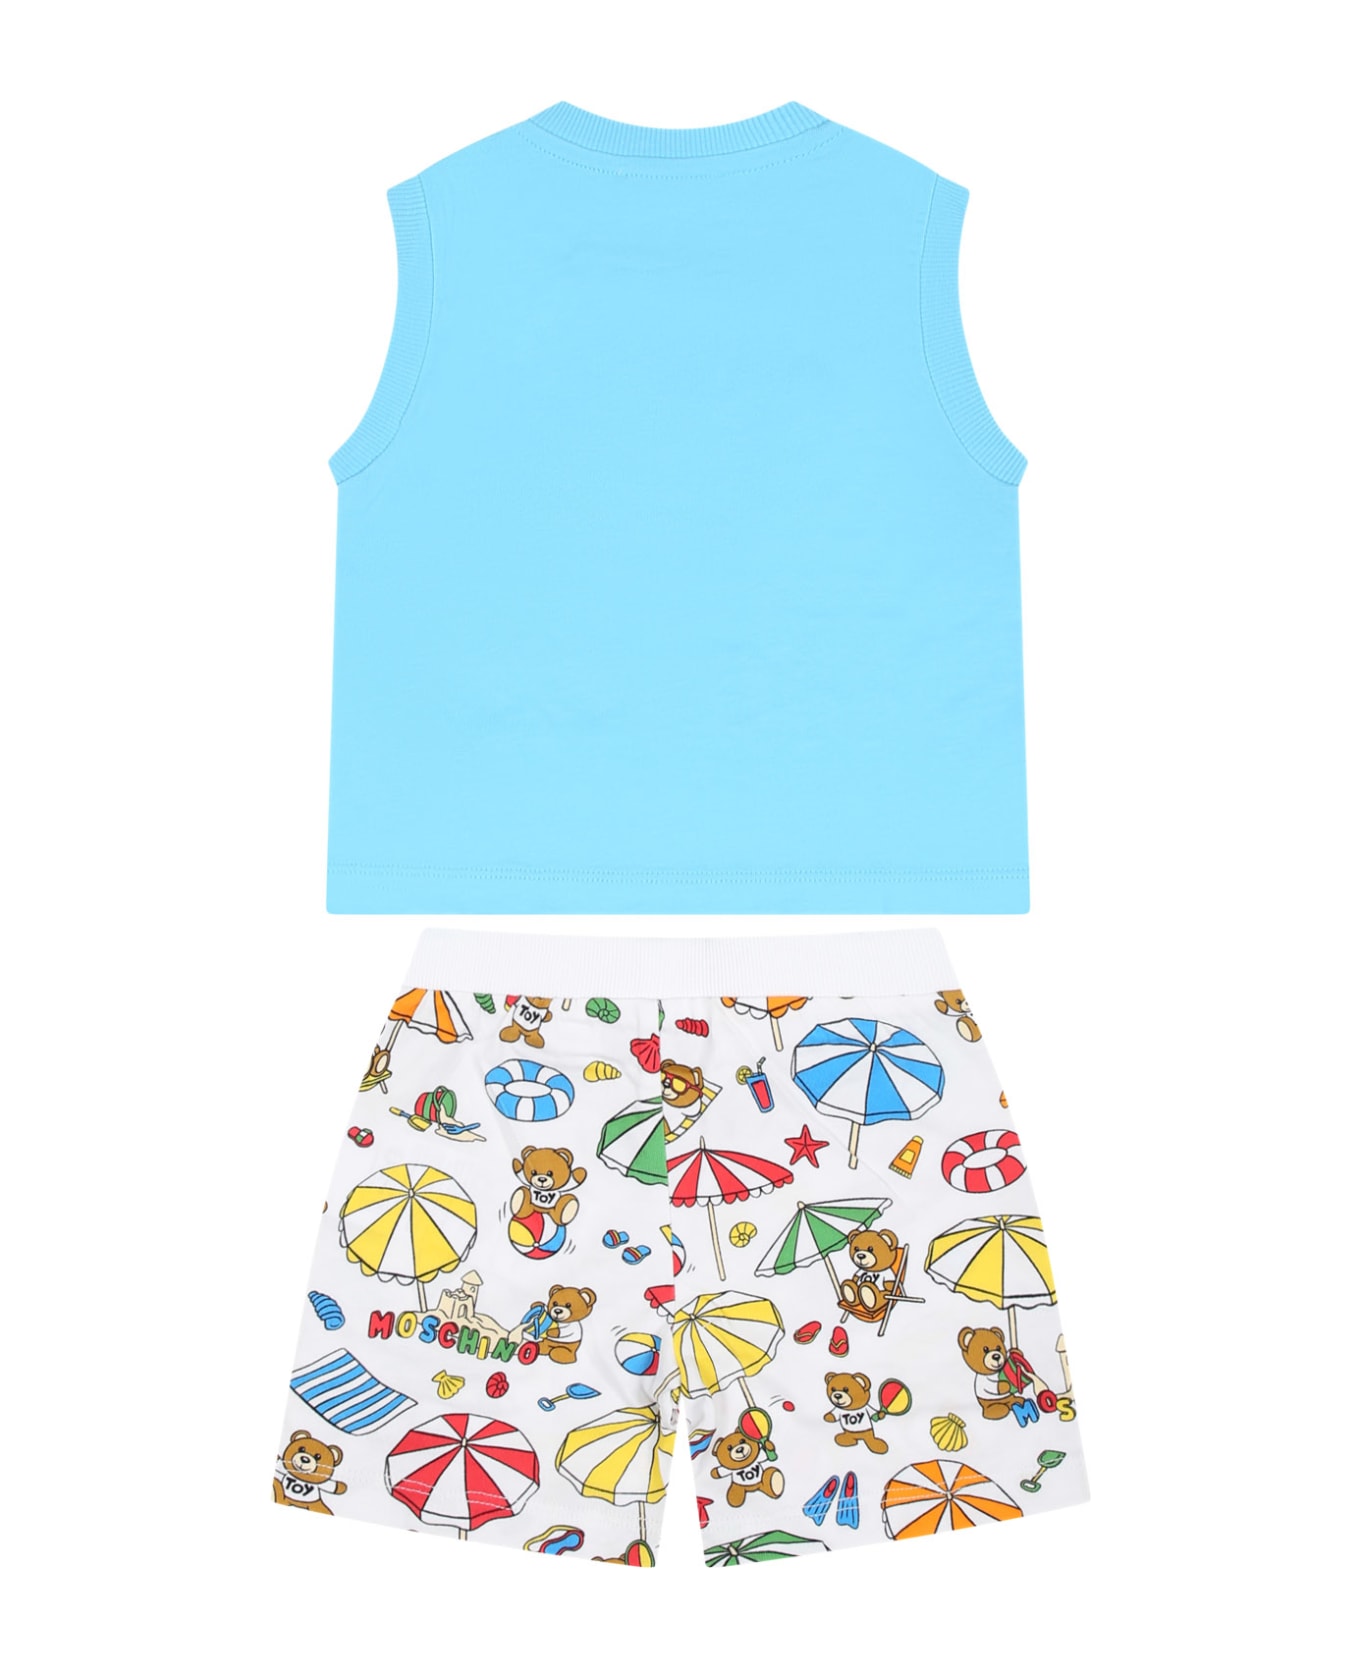 Moschino Sky Blue Sports Suit For Baby Boy With Teddy Bear - Light Blue